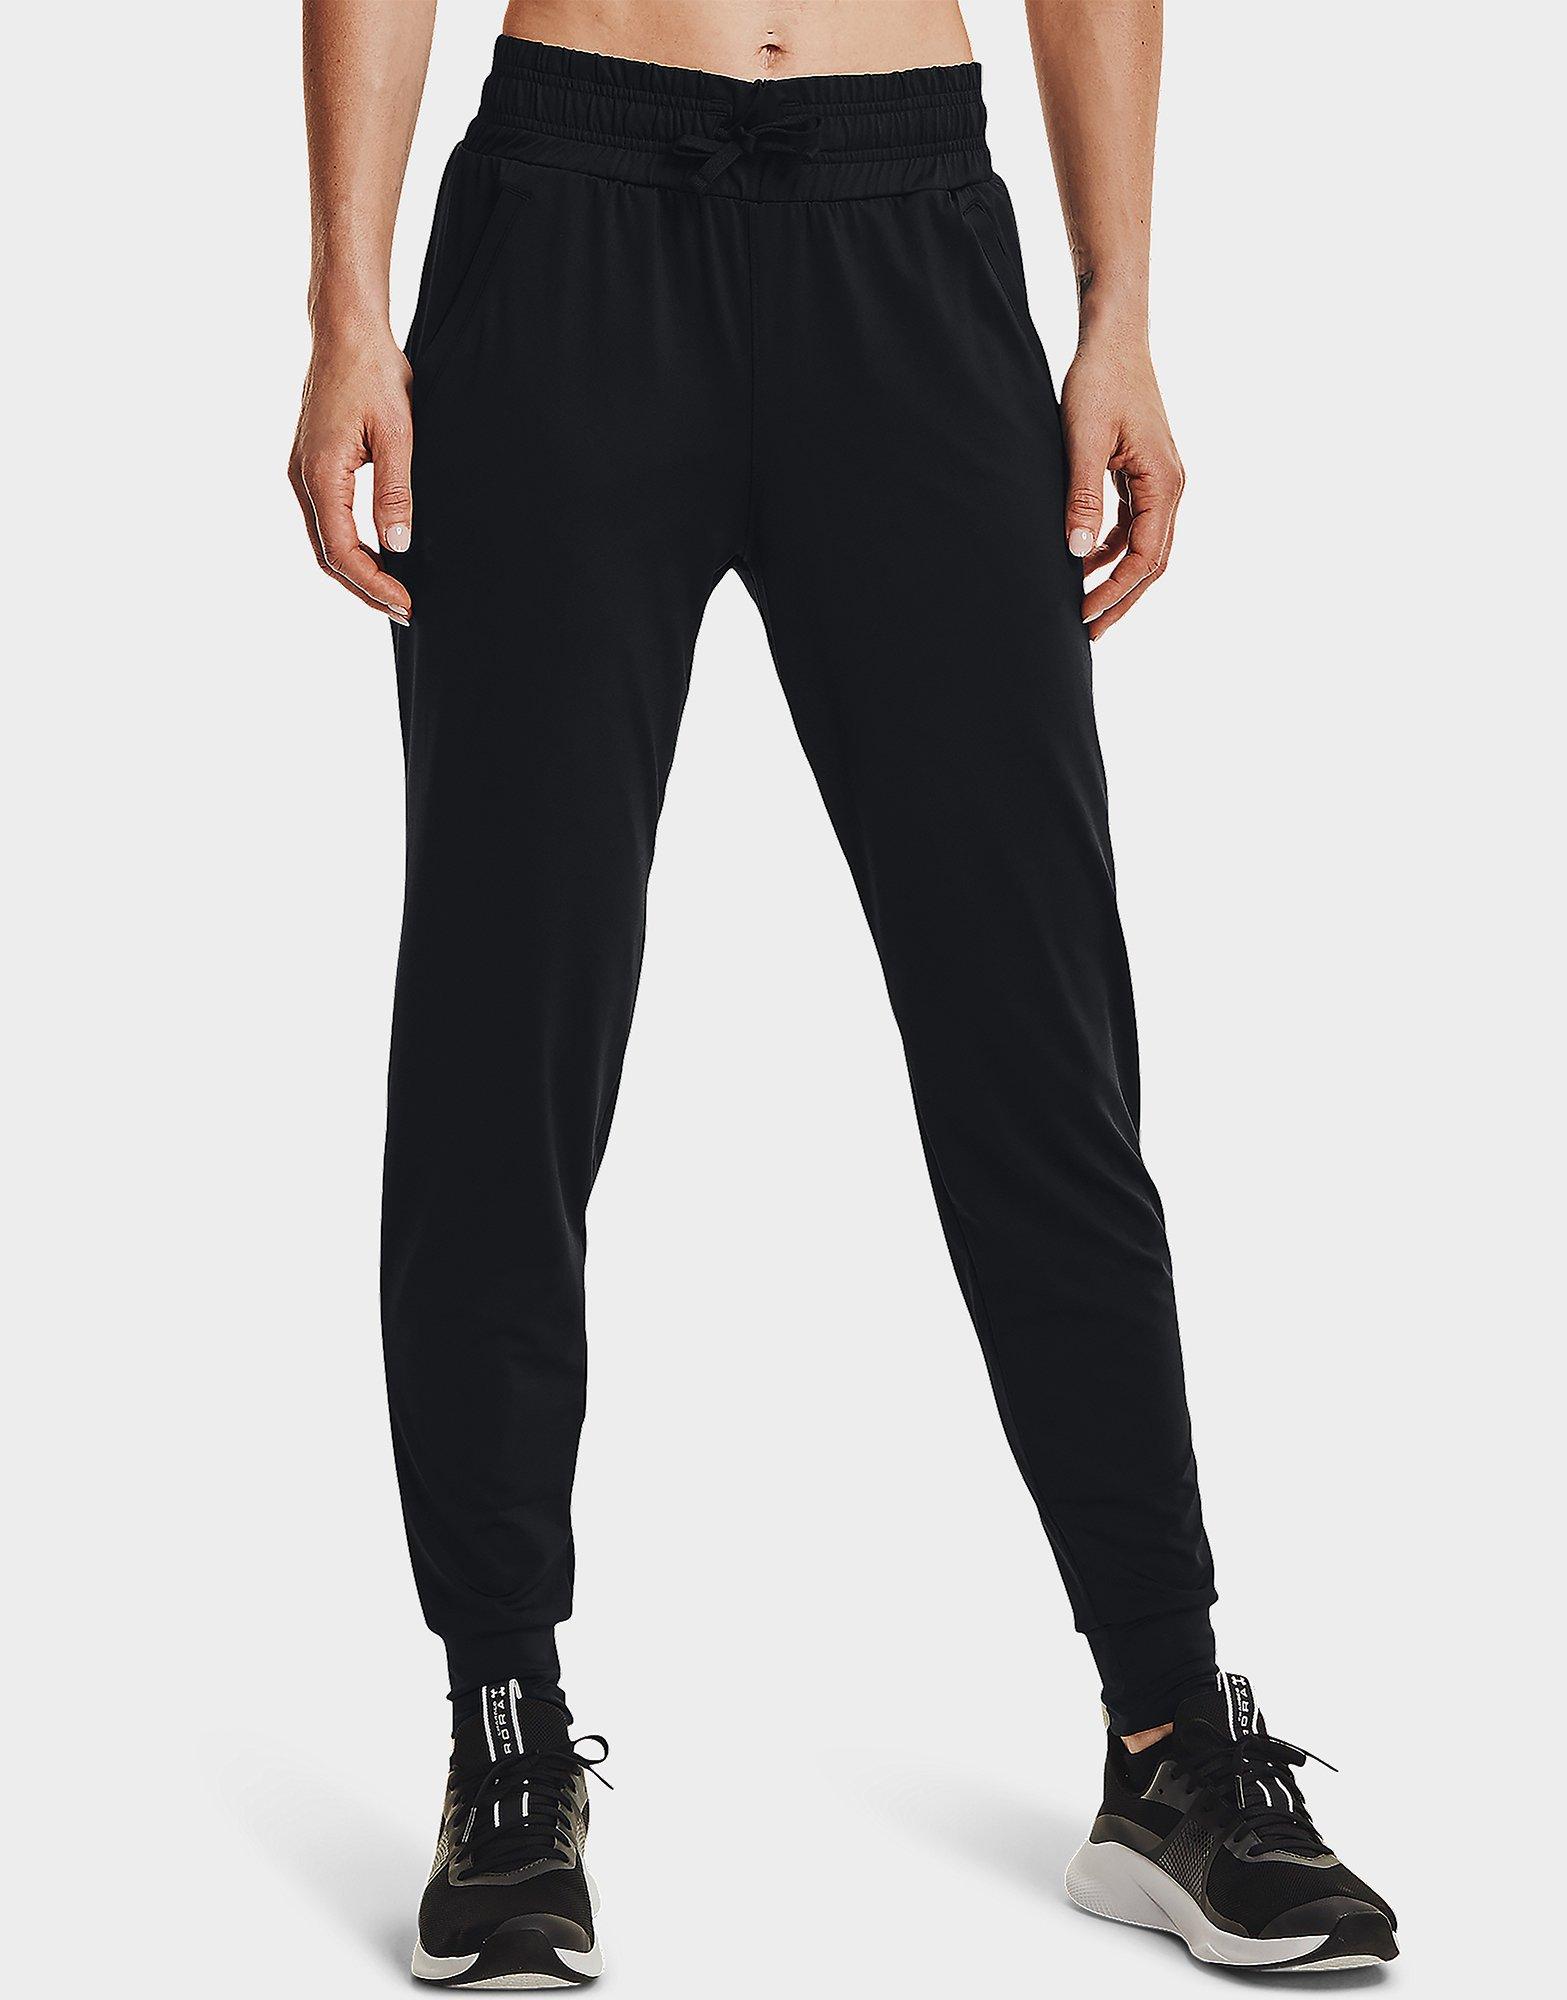 Black Under Armour New Fabric Armour Pants | JD Sports UK